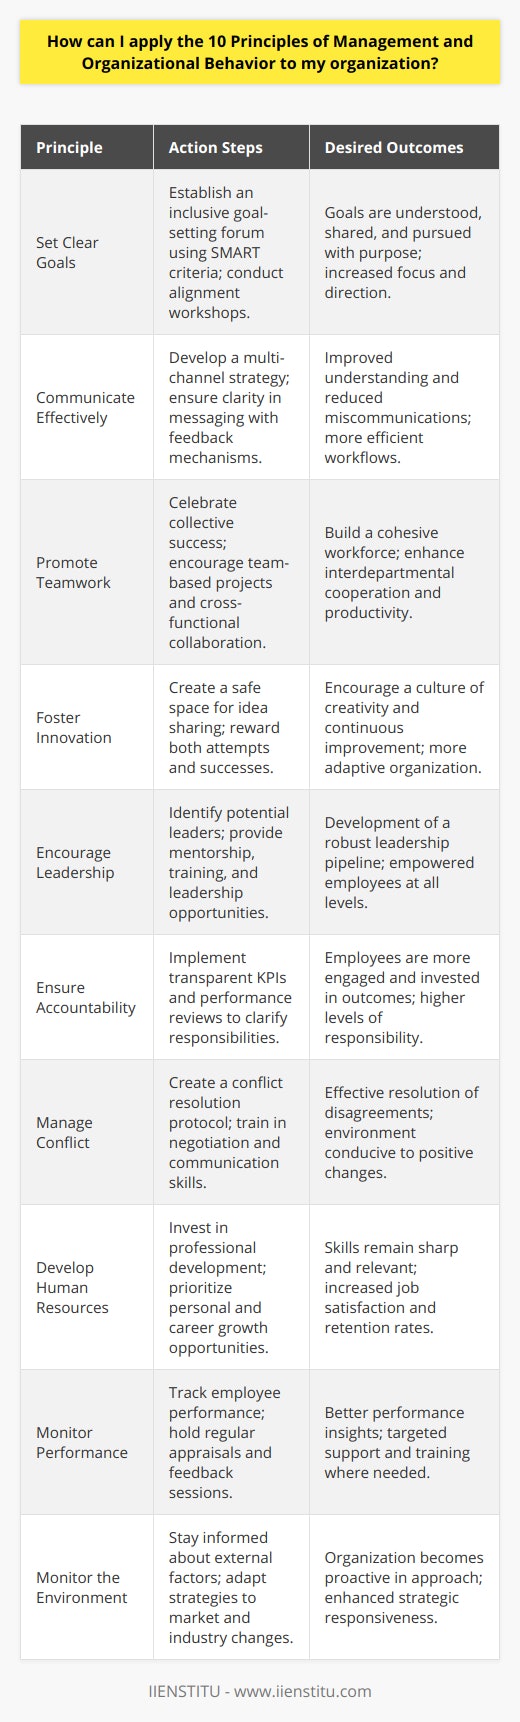 Applying the 10 Principles of Management and Organizational Behavior to your organization involves a strategic approach to enhancing the efficiency and effectiveness of your workforce. These principles are not simple checklists but are frameworks that require understanding, commitment, and adaptation according to the specific circumstances of your organization. Let's delve into each principle and unravel ways to incorporate them into your organizational structure:1. **Set Clear Goals:** Begin by establishing a forum where employees actively participate in goal-setting. Use the SMART criteria – making goals Specific, Measurable, Achievable, Relevant, and Time-bound. Conduct workshops that empower employees to align their personal ambitions with the organization's objectives, ensuring that everyone is moving in the same direction with clarity and purpose.2. **Communicate Effectively:** Develop a multi-channel communication strategy that accommodates the diverse needs of your workforce. This can include regular meetings, memos, internal network systems, and feedback mechanisms. Ensure that the essence of the messages is clear and leaves no room for ambiguity, which could lead to confusion and errors.3. **Promote Teamwork:** Create a culture where collective success is as celebrated as individual achievement. Encourage collaboration through team-based projects and use cross-functional teams to foster understanding and respect among different departments. Team building activities and retreats can also strengthen bonds and promote a spirit of unity.4. **Foster Innovation:** Develop a platform where employees can pitch new ideas without the fear of ridicule or rejection. Implement a reward system that acknowledges both successful innovations and valuable attempts. Encourage employees to experiment and learn from mistakes to create a dynamic and progressive work environment.5. **Encourage Leadership:** Identify employees with leadership potential and tailor individual development plans for them. This could involve mentorship programs, leadership training, and giving them the opportunity to lead small projects. Leadership potential should be nurtured at every level of the organization, not just the management.6. **Ensure Accountability:** Set up a transparent system where responsibilities and expectations are clearly defined. Use key performance indicators (KPIs) and regular performance reviews to measure outcomes. When employees understand how their work contributes to the organization's success, they are more likely to feel responsible for the results.7. **Manage Conflict:** Create a conflict resolution protocol to address disagreements effectively. Training employees in negotiation and communication skills can help prevent conflicts from escalating. It's important that conflicts are seen as a natural part of the organizational growth process, with potential for positive change and innovation.8. **Develop Human Resources:** Invest in your employees' professional development by providing access to training, workshops, and continuing education. Make personal and career growth a priority within the organization and support your workforce in keeping their skills sharp and relevant.9. **Monitor Performance:** Implement systems to track and manage employee performance constructively. Regular appraisals and feedback sessions can guide employees towards better performance while also identifying areas that may need additional support or training.10. **Monitor the Environment:** Stay informed about the external factors that influence your industry and business. This includes technological advances, market trends, regulatory changes, and socioeconomic shifts. Use this information to adapt strategies and ensure your organization is proactive rather than reactive to environmental changes.By integrating these principles with a clear, thoughtful approach, and creating an organizational culture that values continuous improvement, you can enhance productivity and foster a workplace that is not only efficient but also adaptable and forward-looking. Remember that the effective implementation of these management and organizational behavior principles requires commitment from both leaders and employees to work in harmony towards shared goals and objectives.